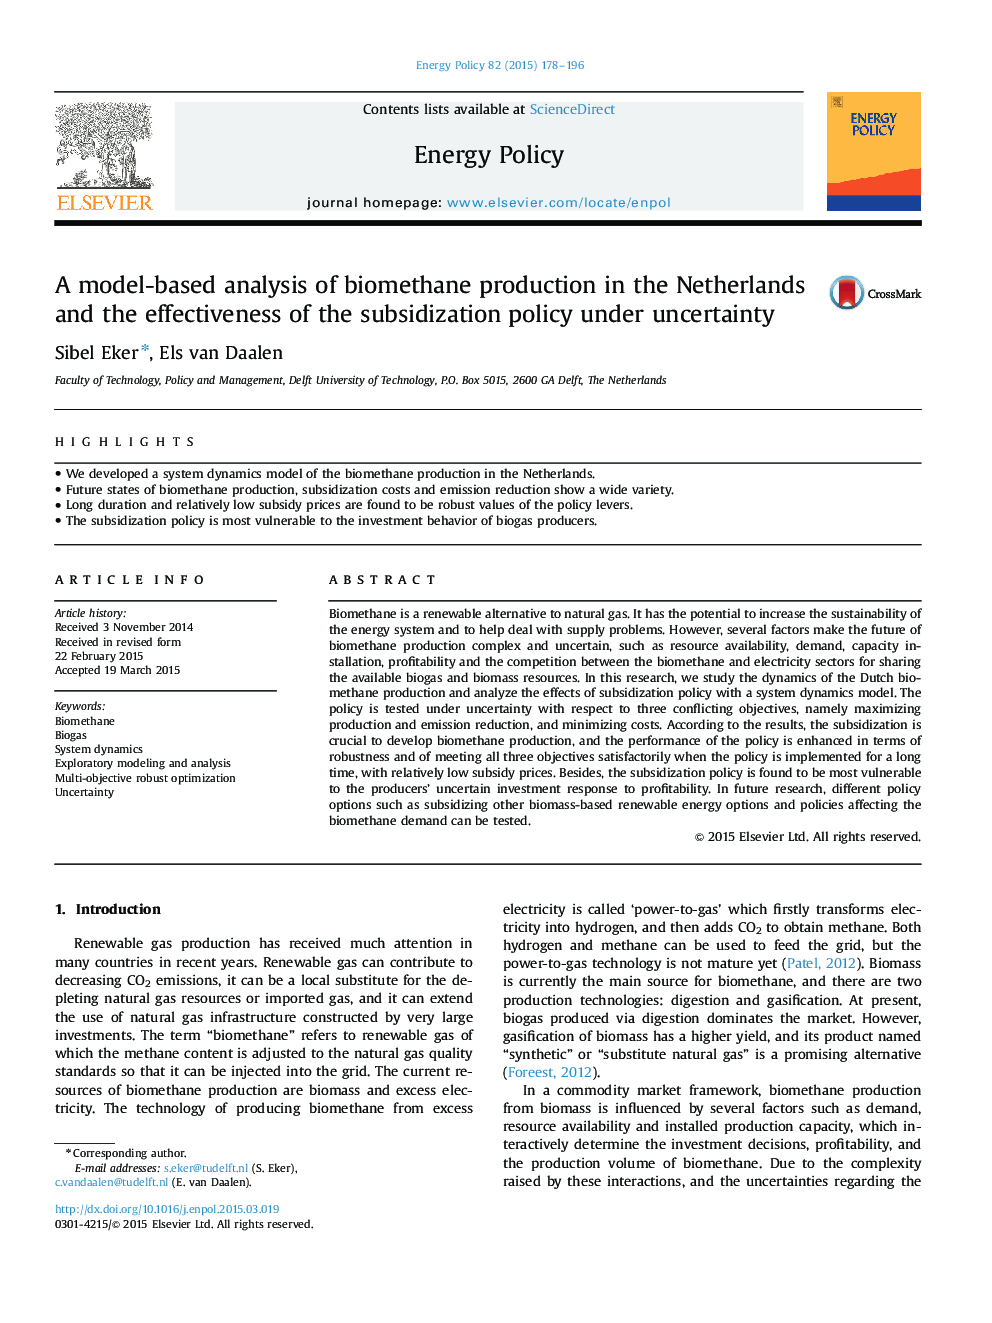 A model-based analysis of biomethane production in the Netherlands and the effectiveness of the subsidization policy under uncertainty